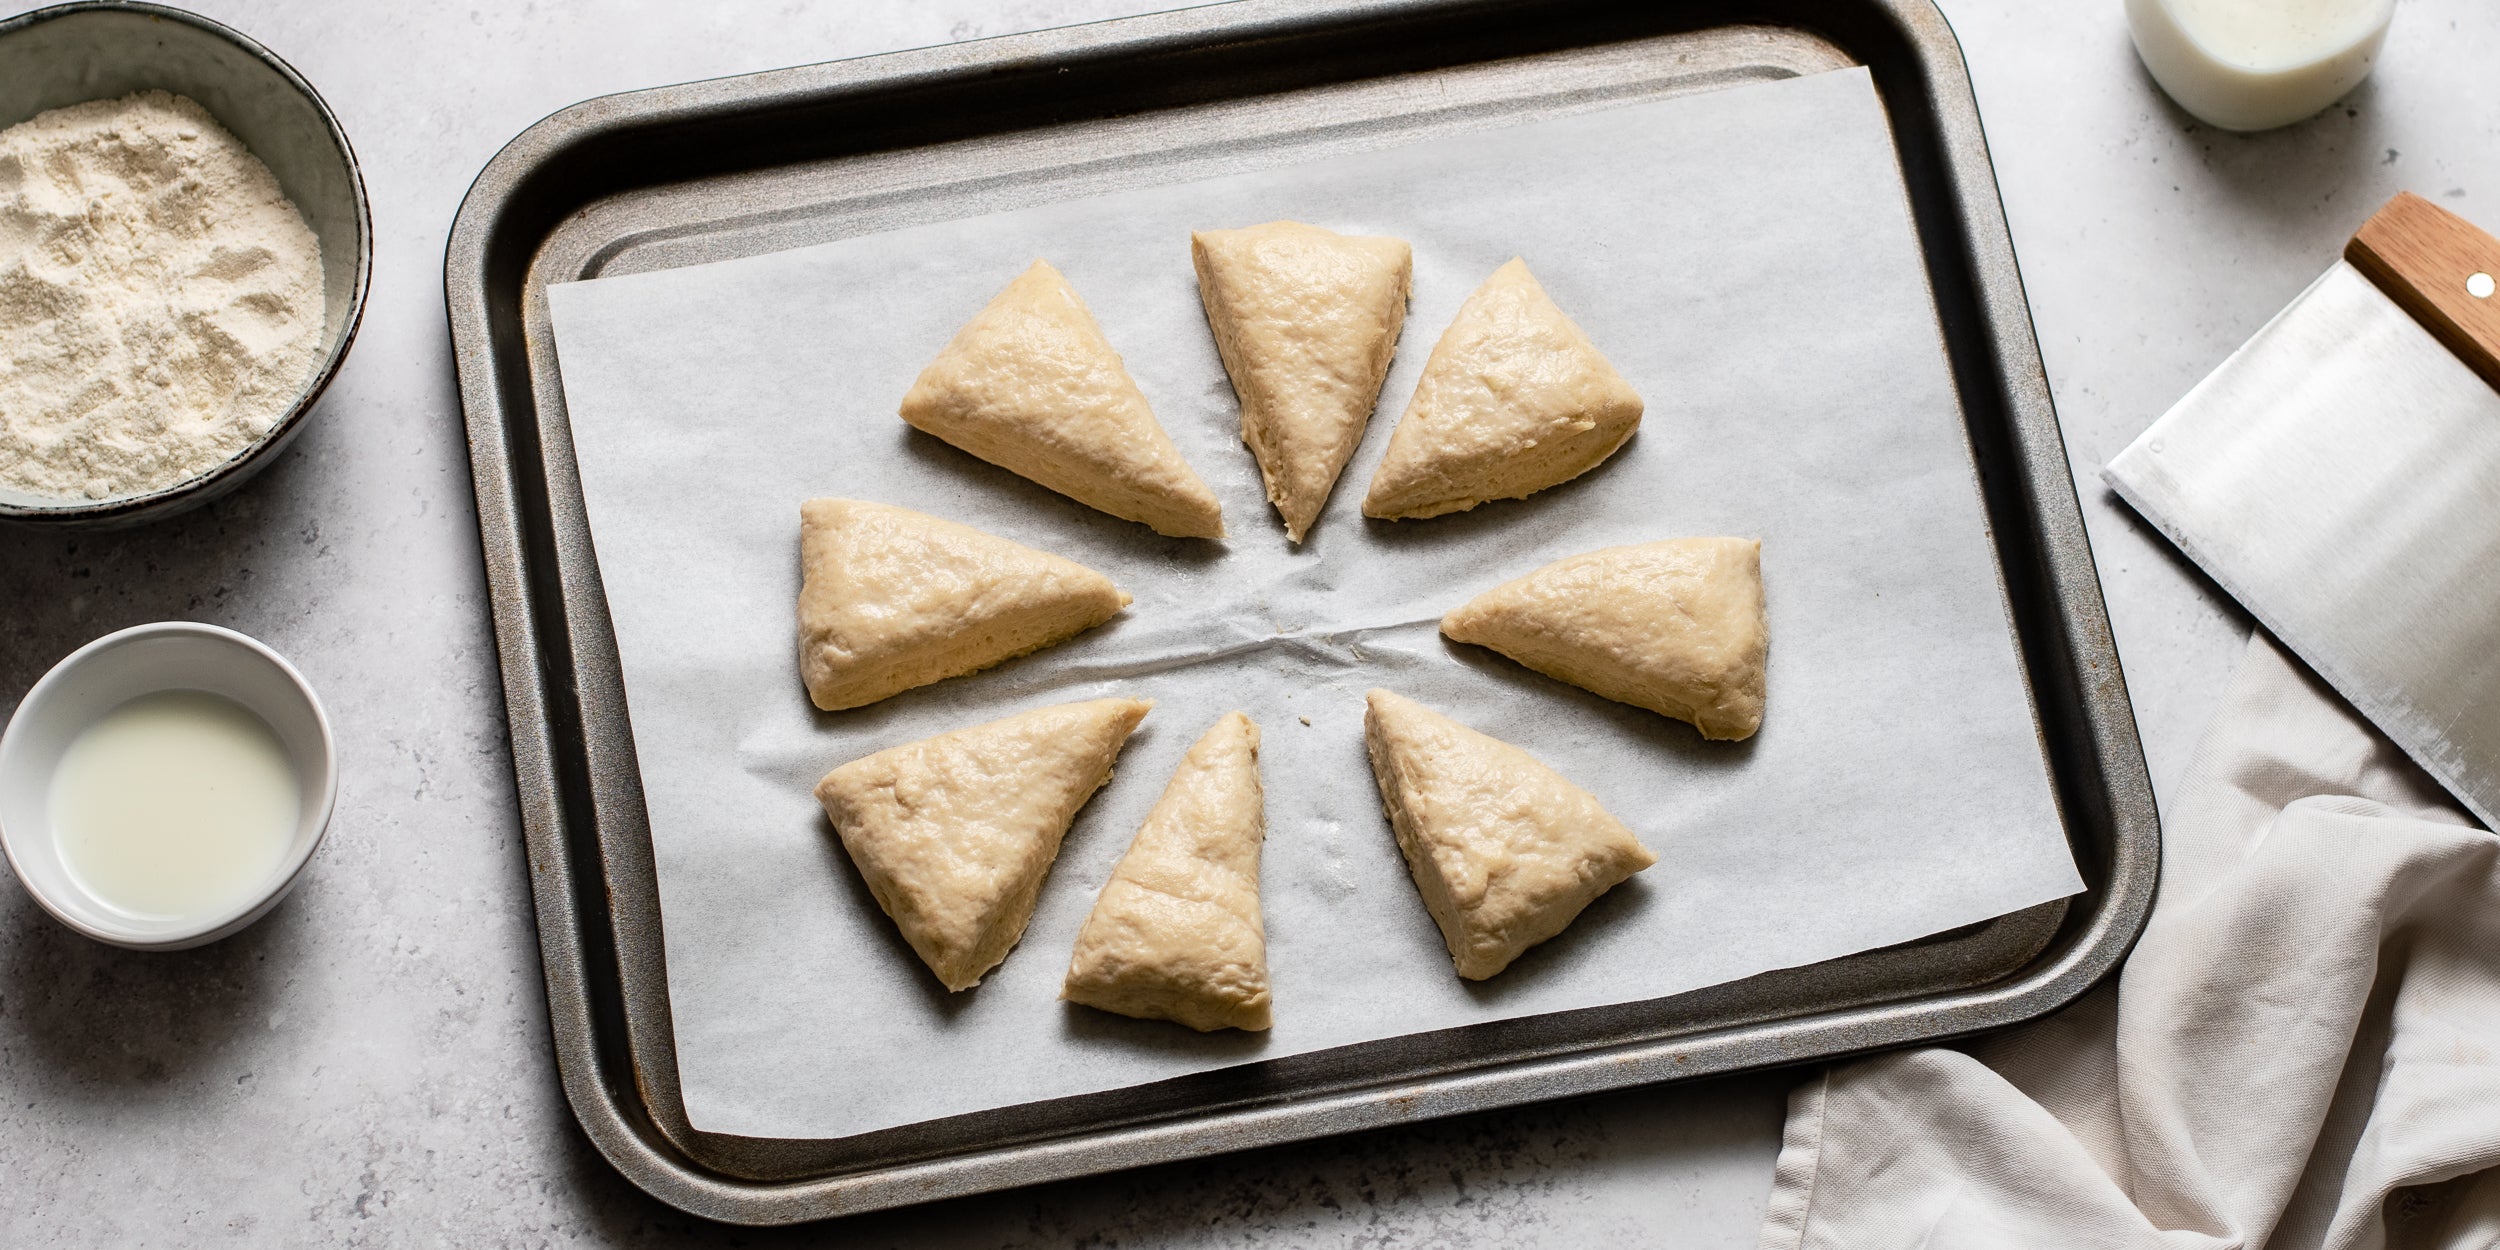 Easy Scones cut into portions on a lined baking tray ready to bake